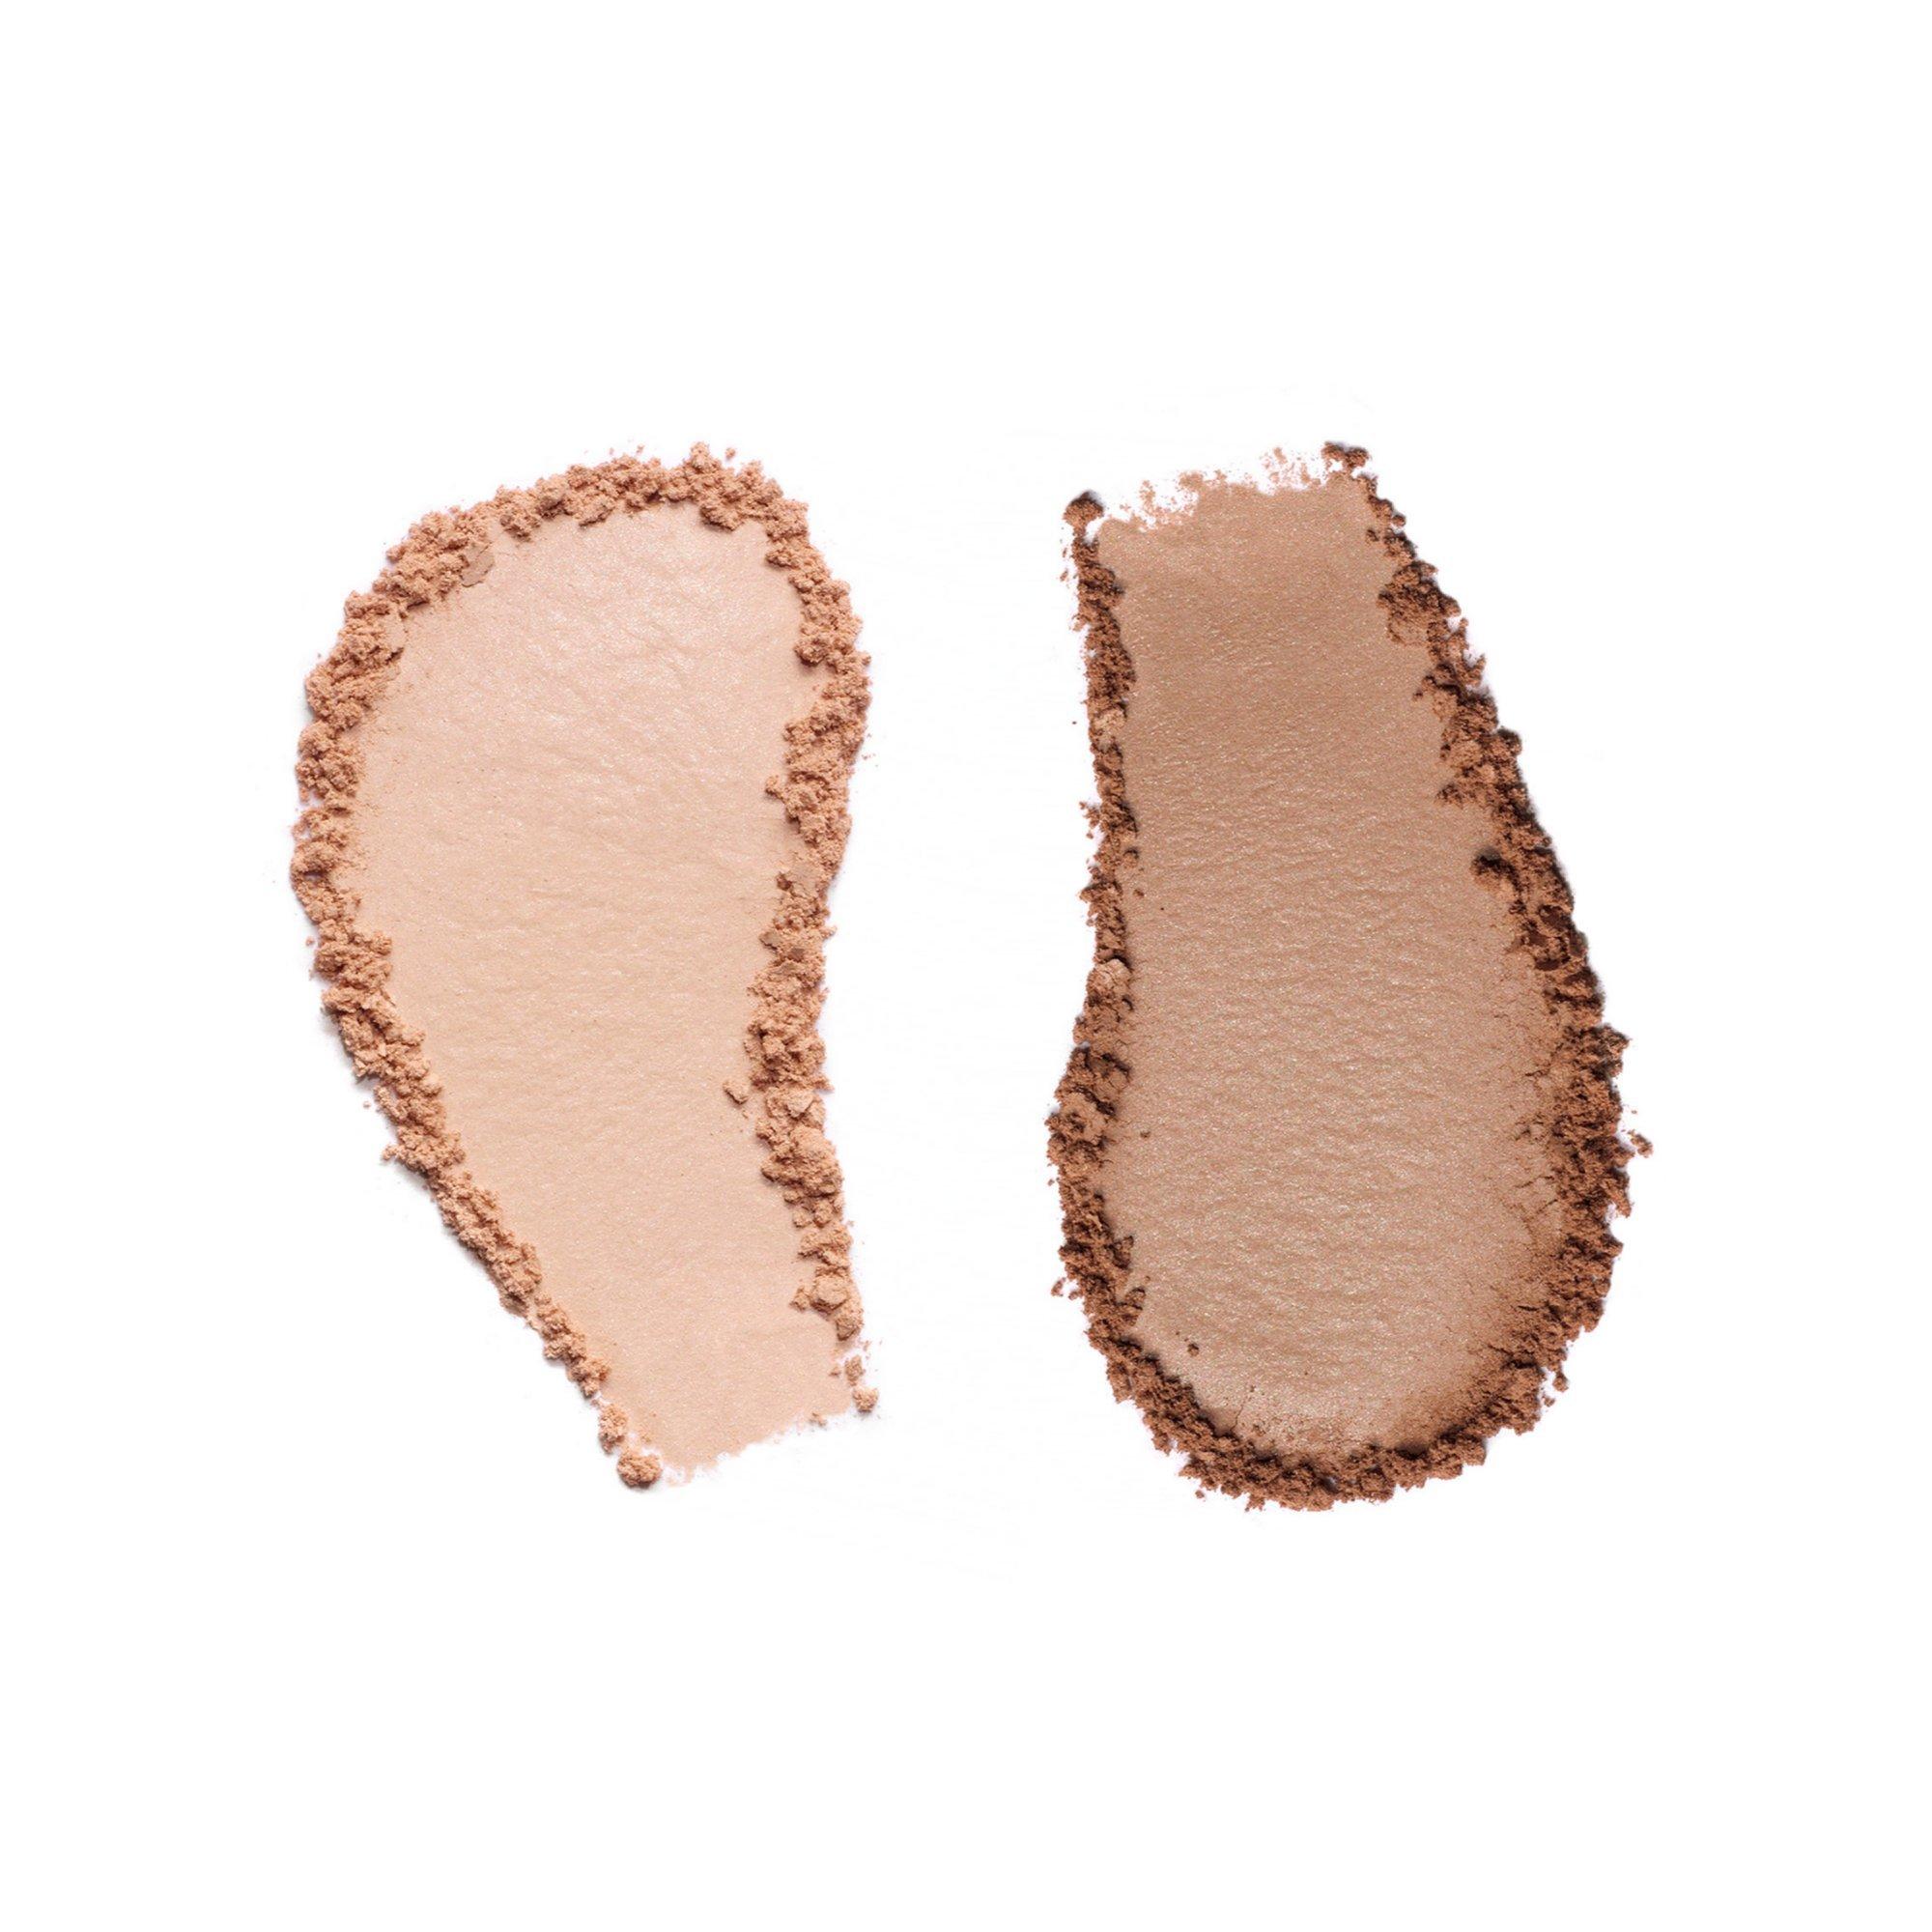 CONTOURING DUO PALET